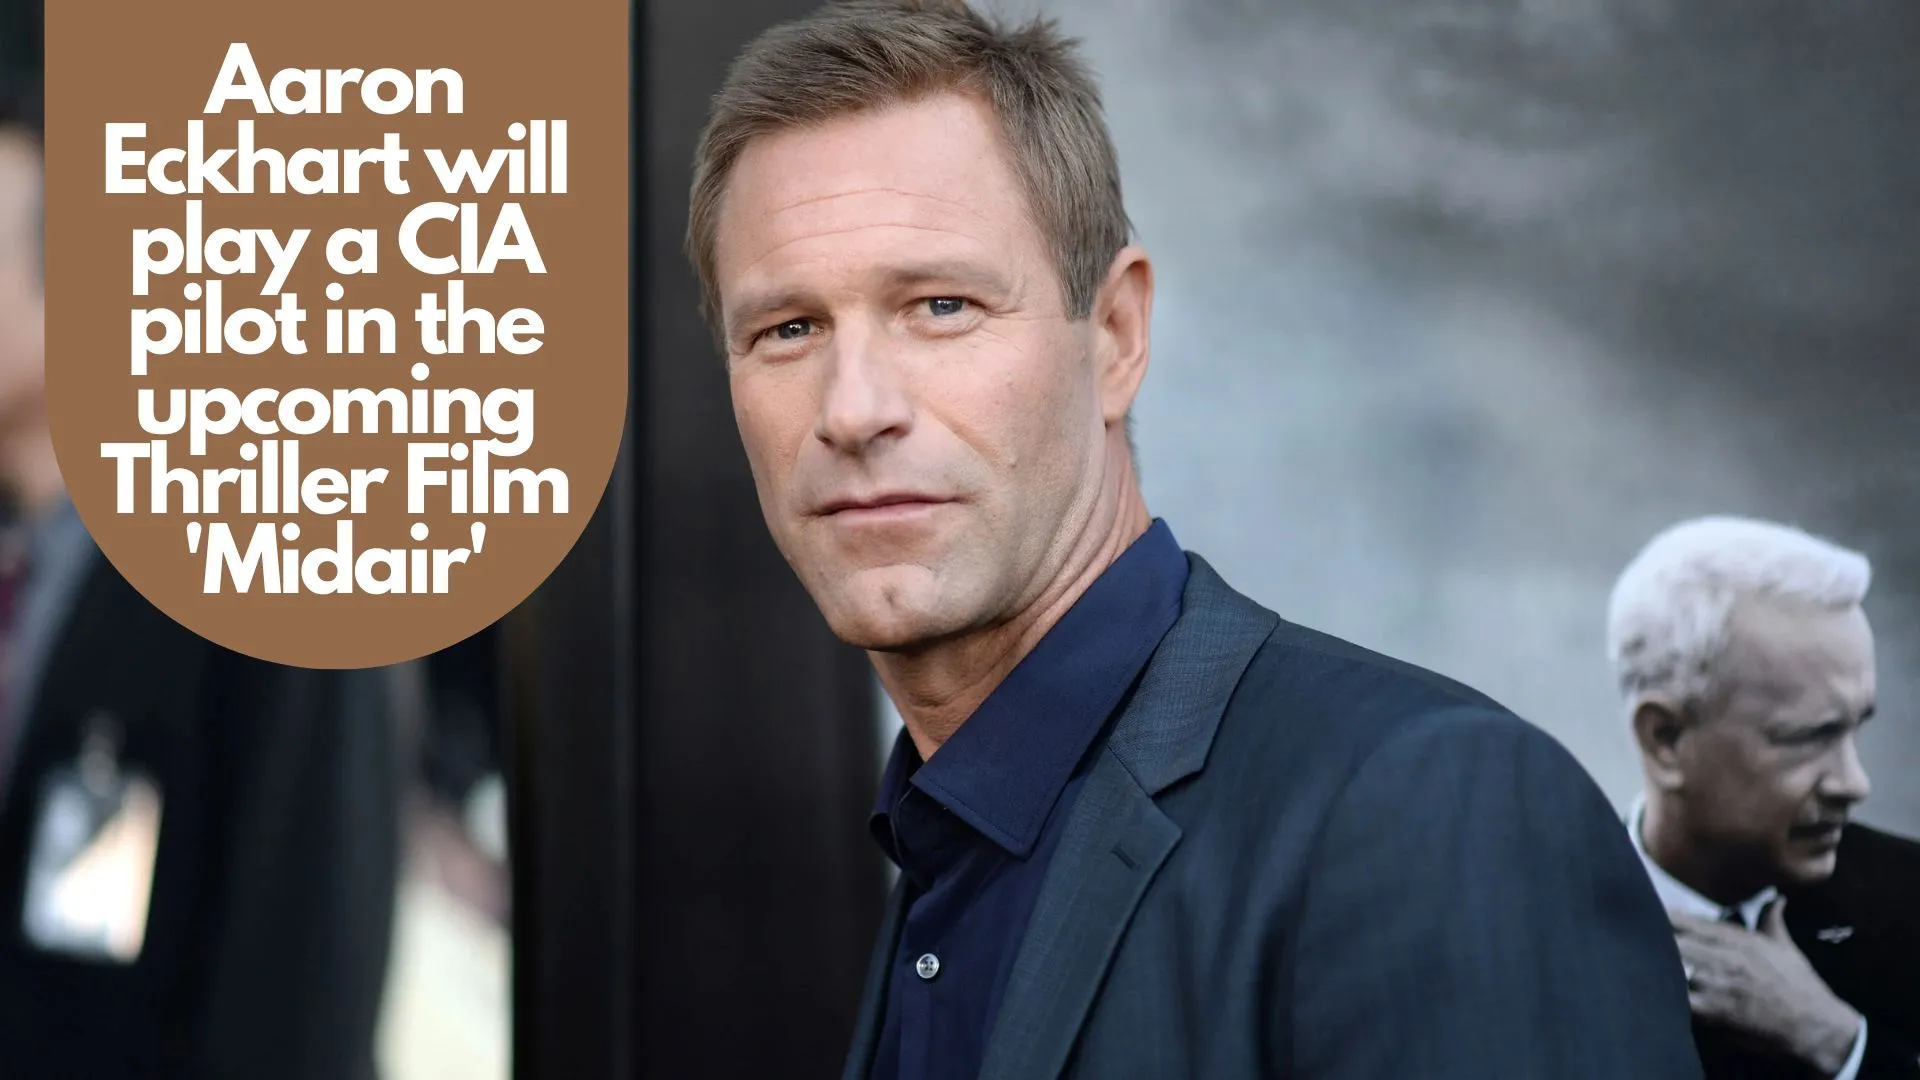 Aaron Eckhart will play a CIA pilot in the upcoming Thriller Film 'Midair' (Image credit: Variety)